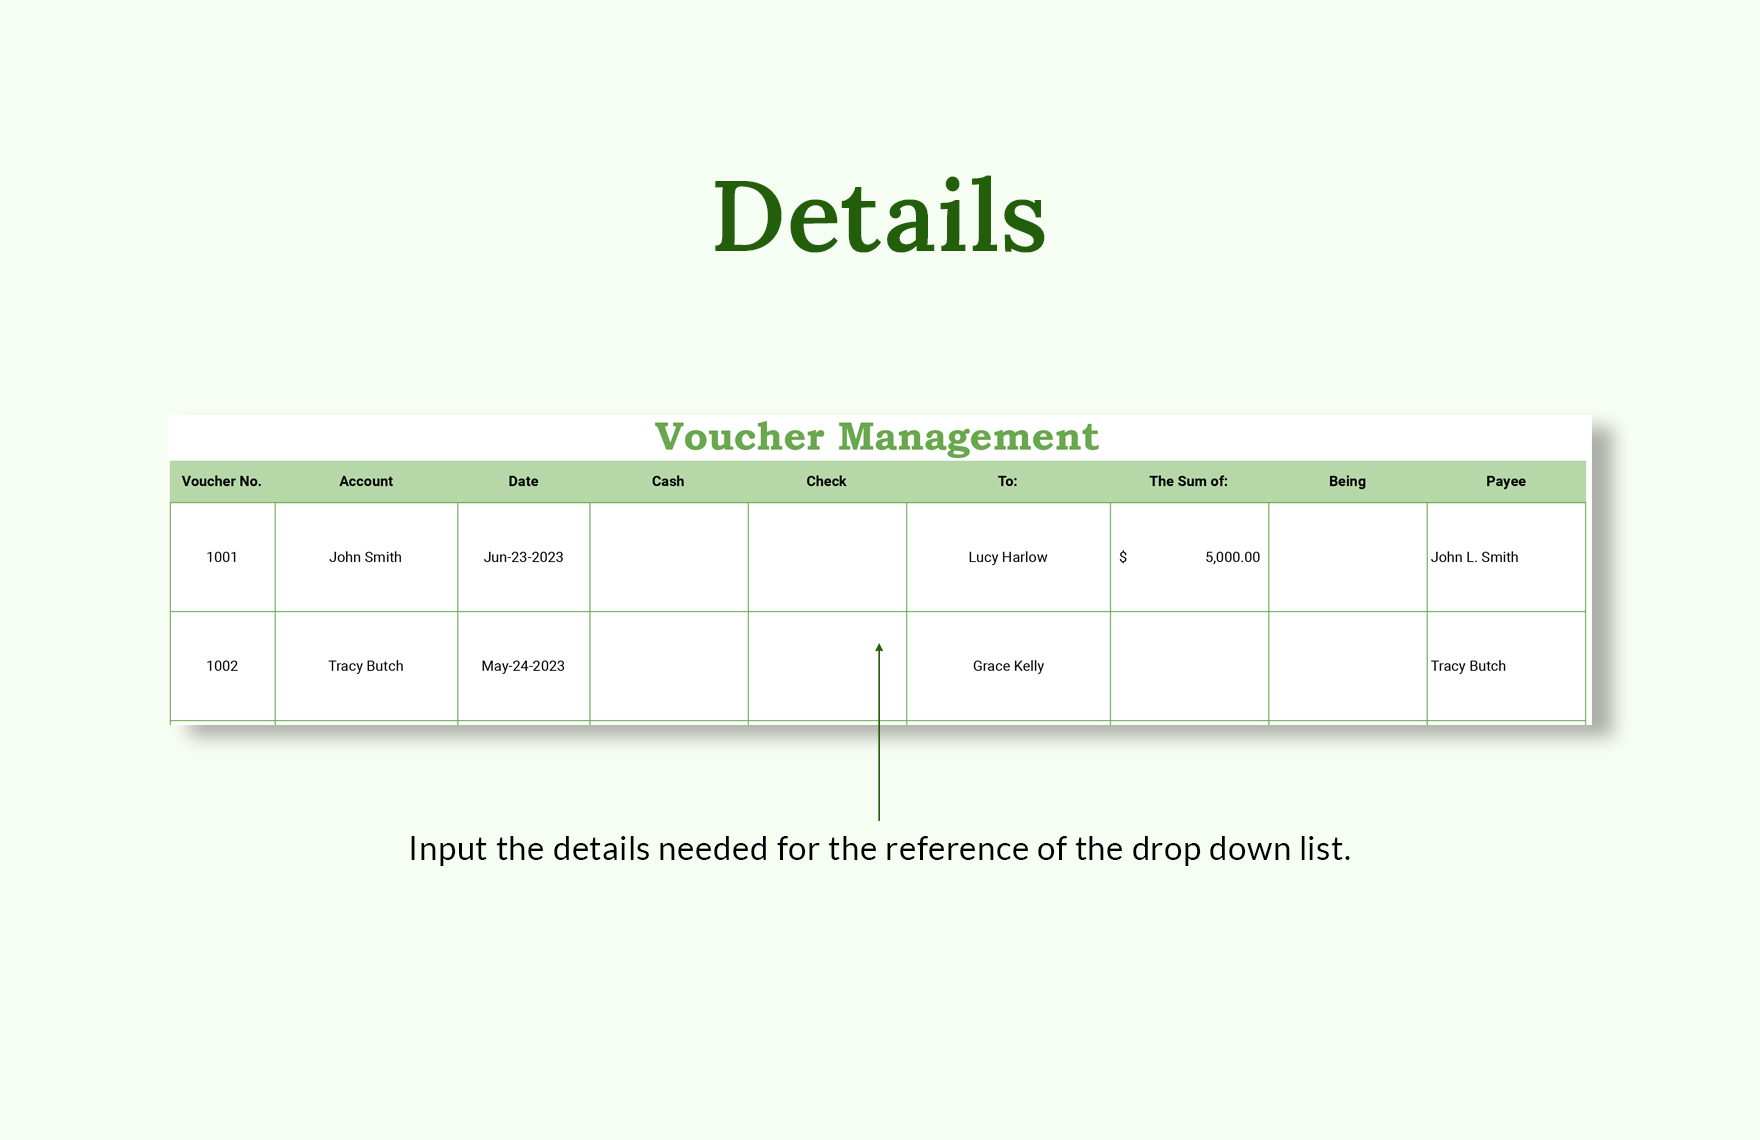 Accounting Voucher Template